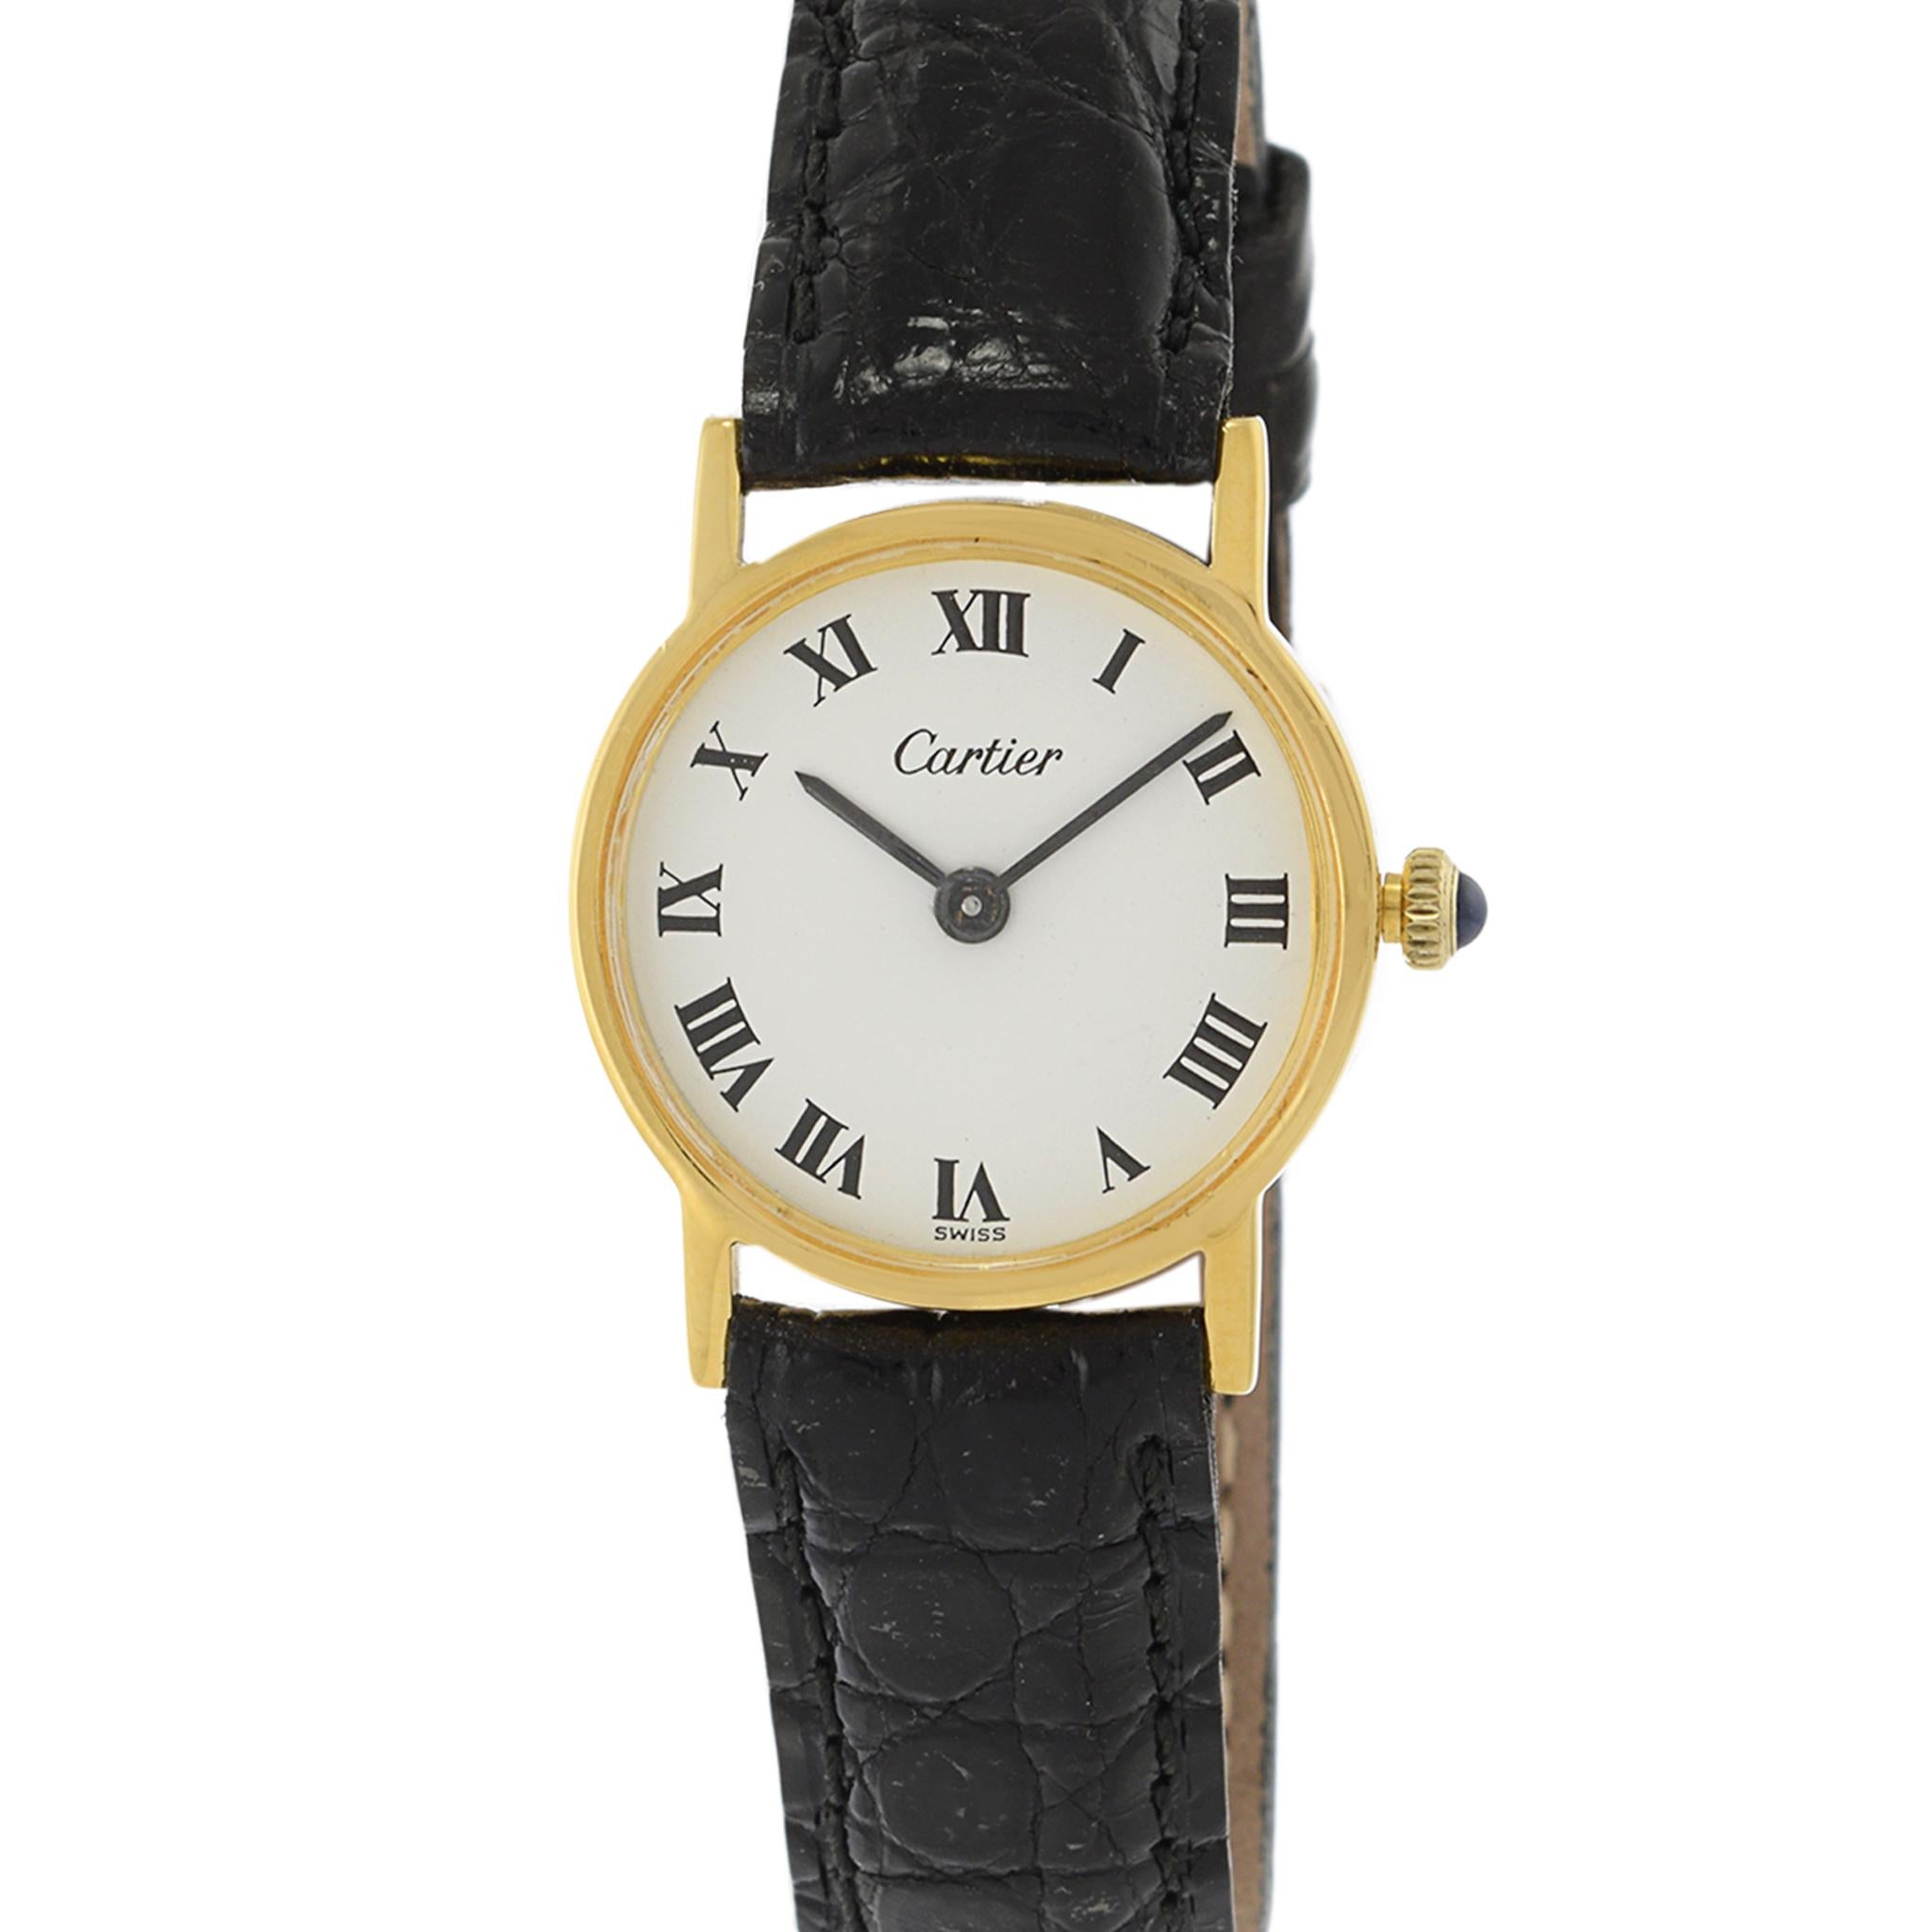 Cartier Calatrava Vermeil 24mm Manual Wind In Good Condition For Sale In New York, NY